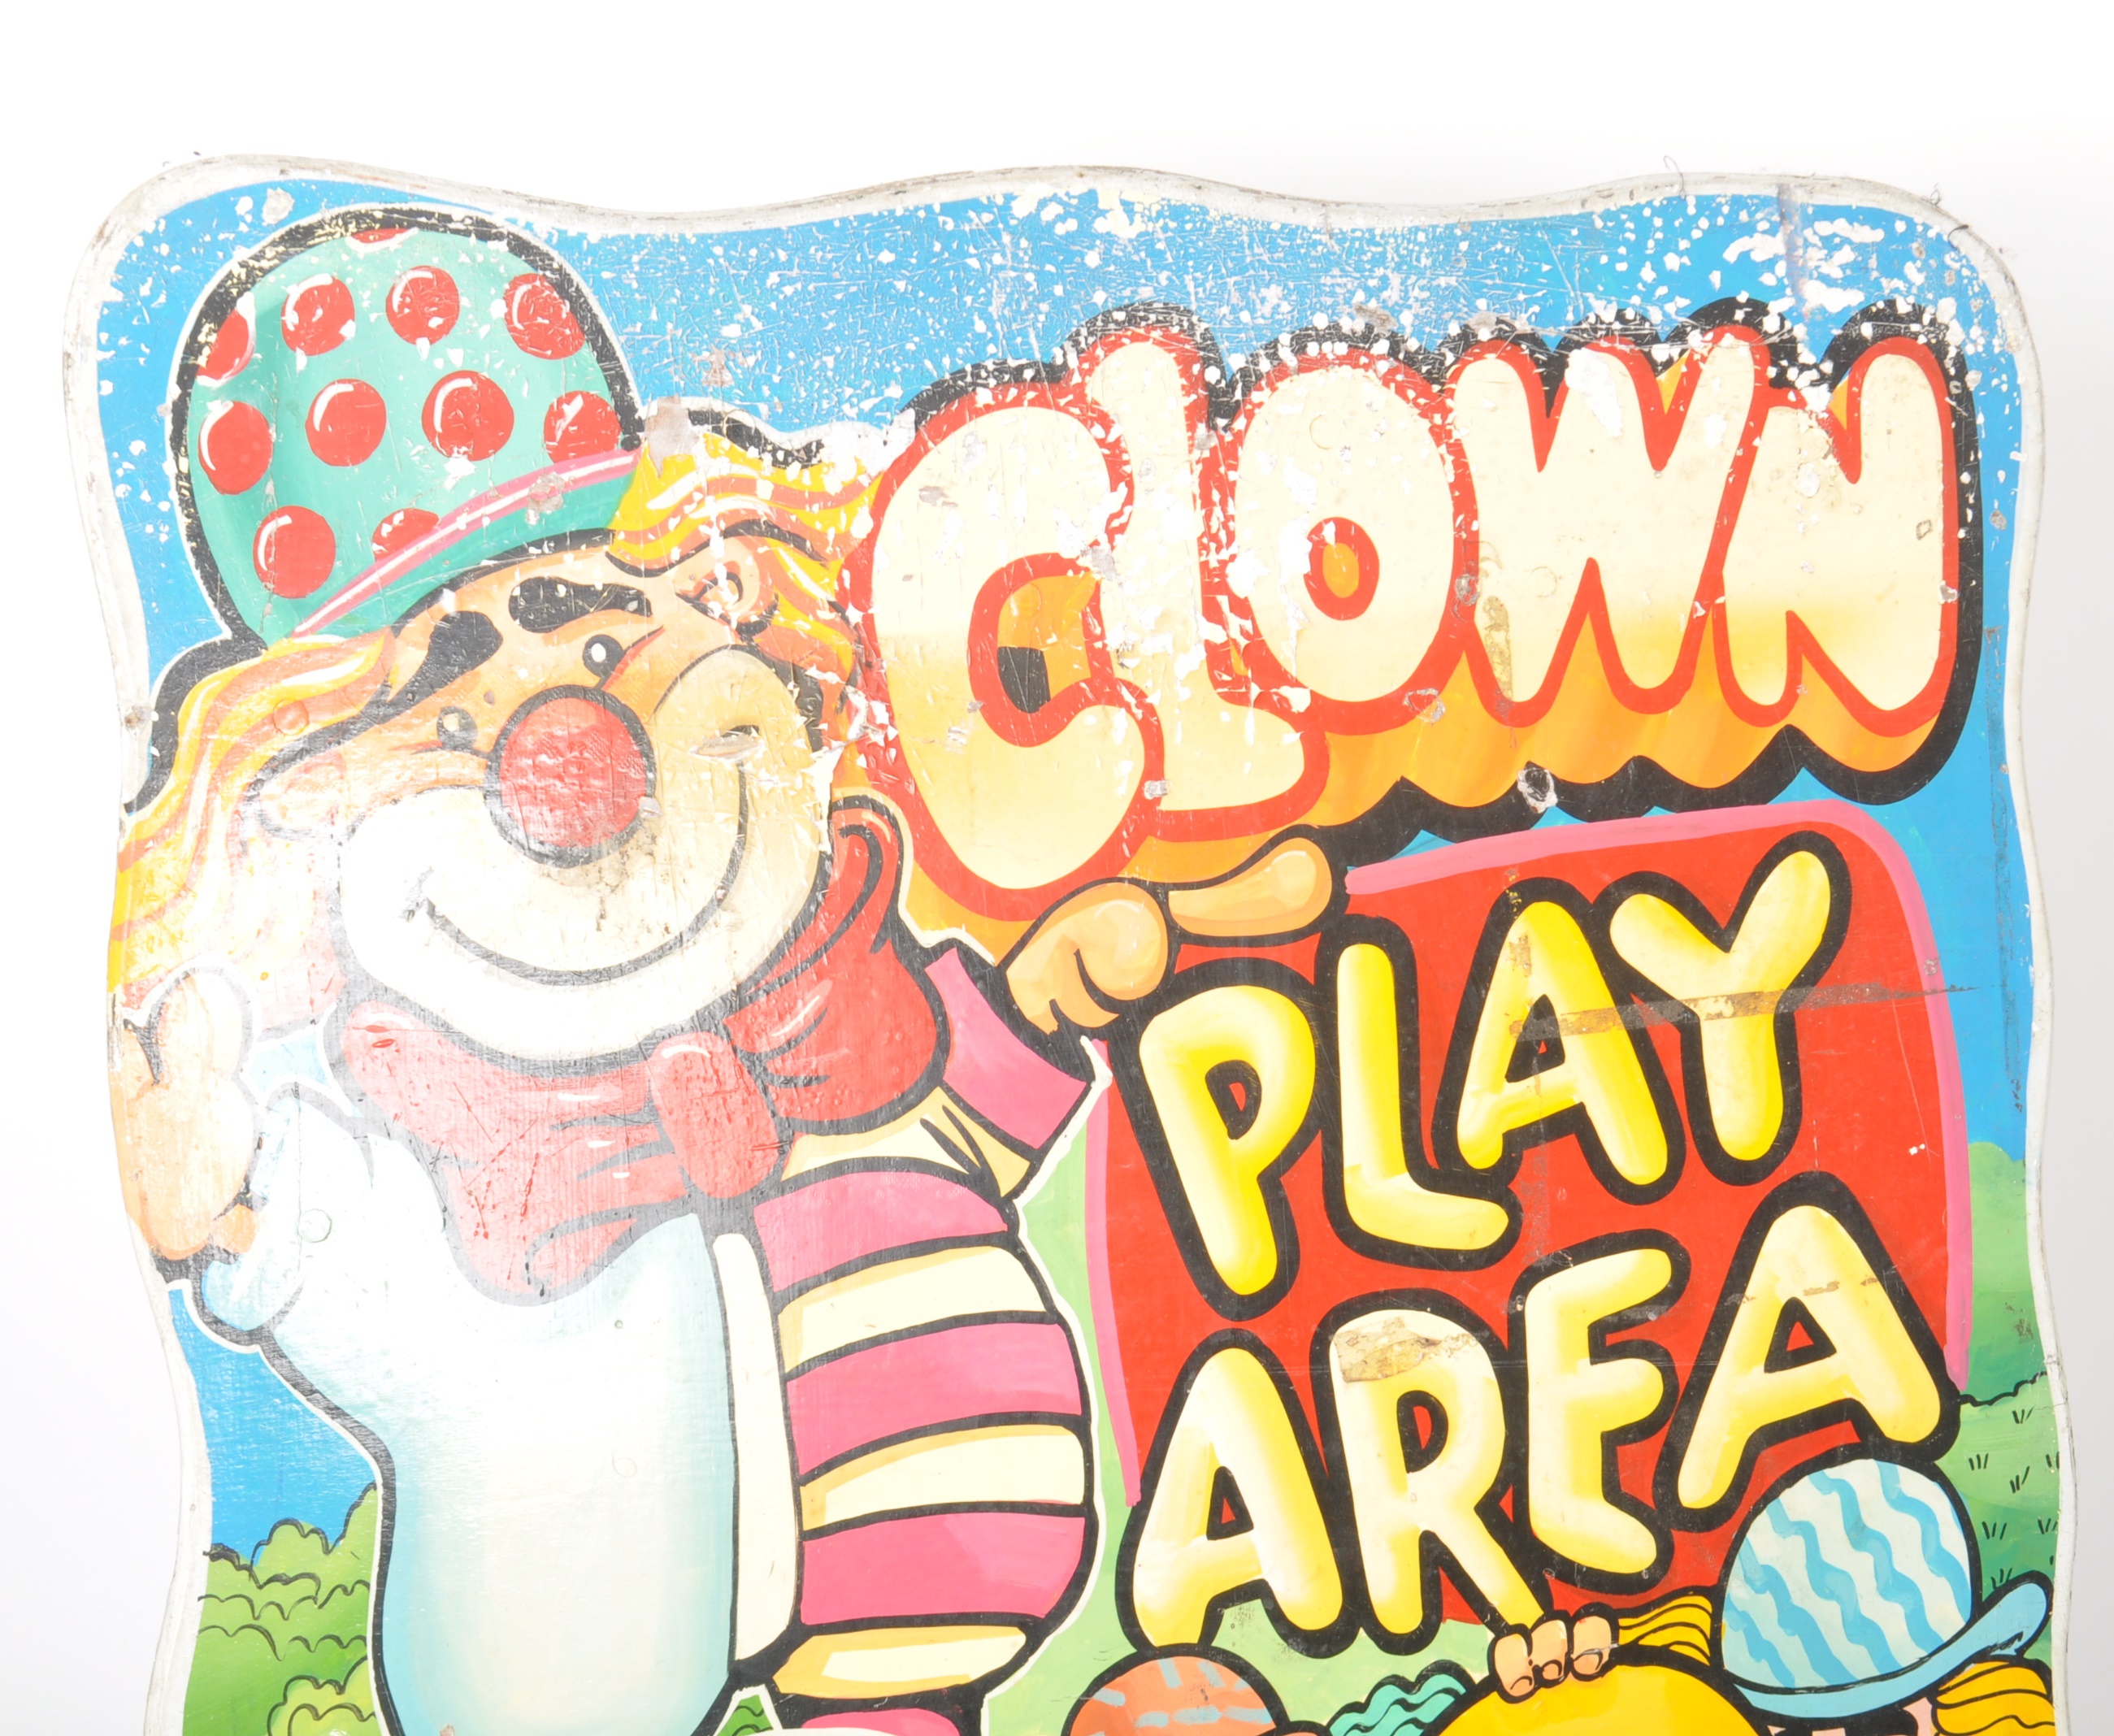 VINTAGE 20TH CENTURY FAIRGROUND CLOWN PLAY AREA SIGN - Image 2 of 6